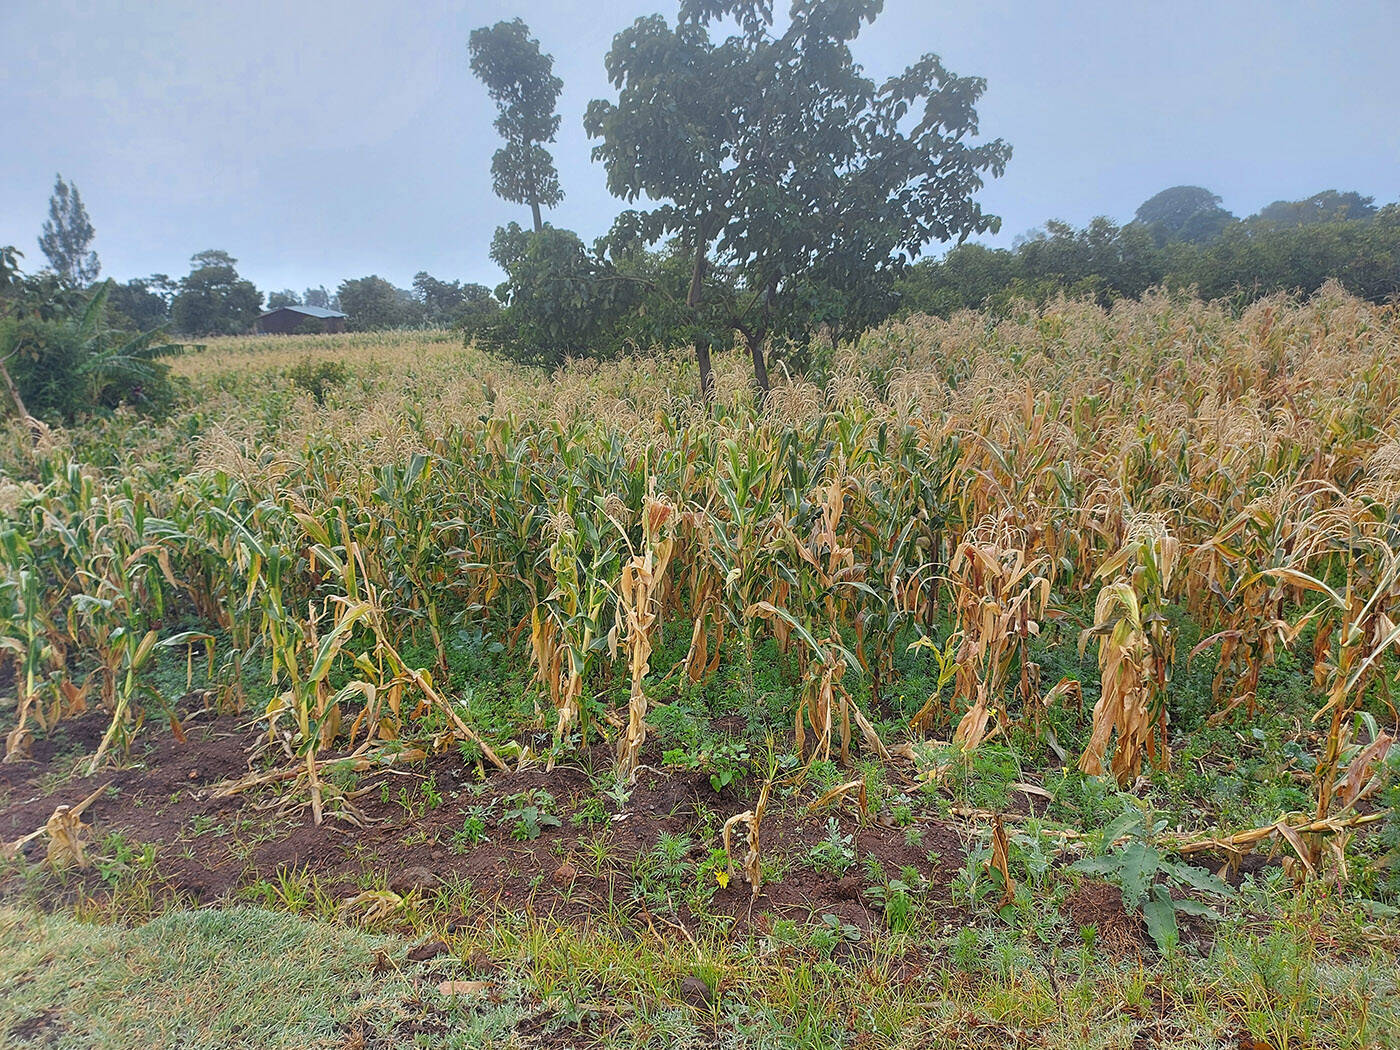 Crops in Ethiopia in July. Drought has brought stunted growth for years and Canadian Foodgrains Bank is helping those farmers build climate-resilient food systems. (Canadian Foodgrains Bank)